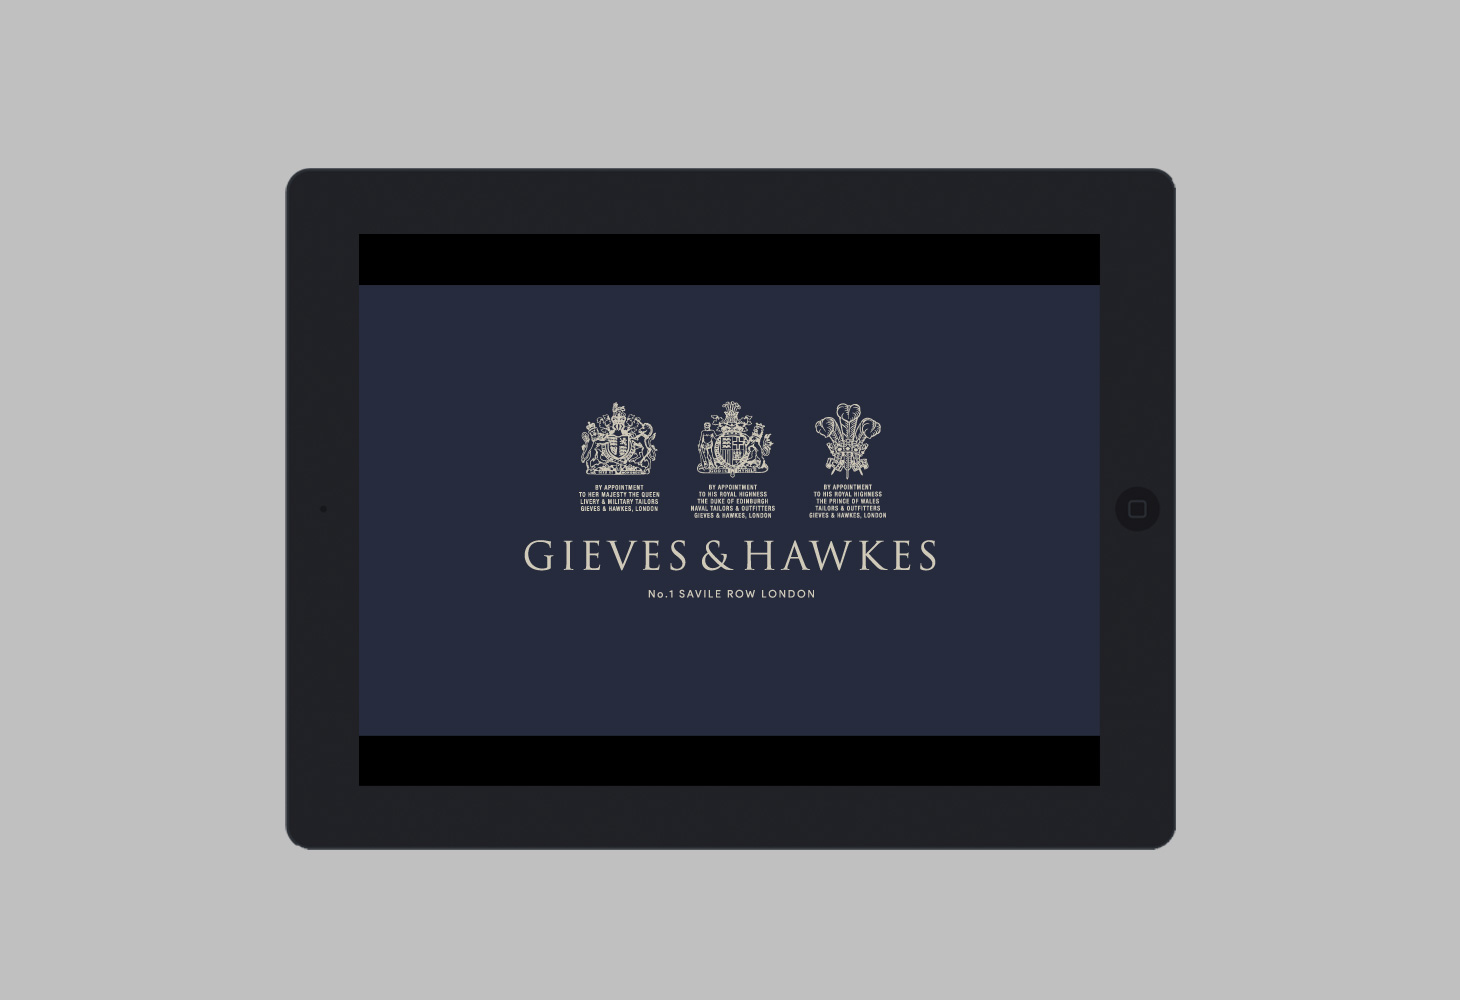 Gieves & Hawkes - Application